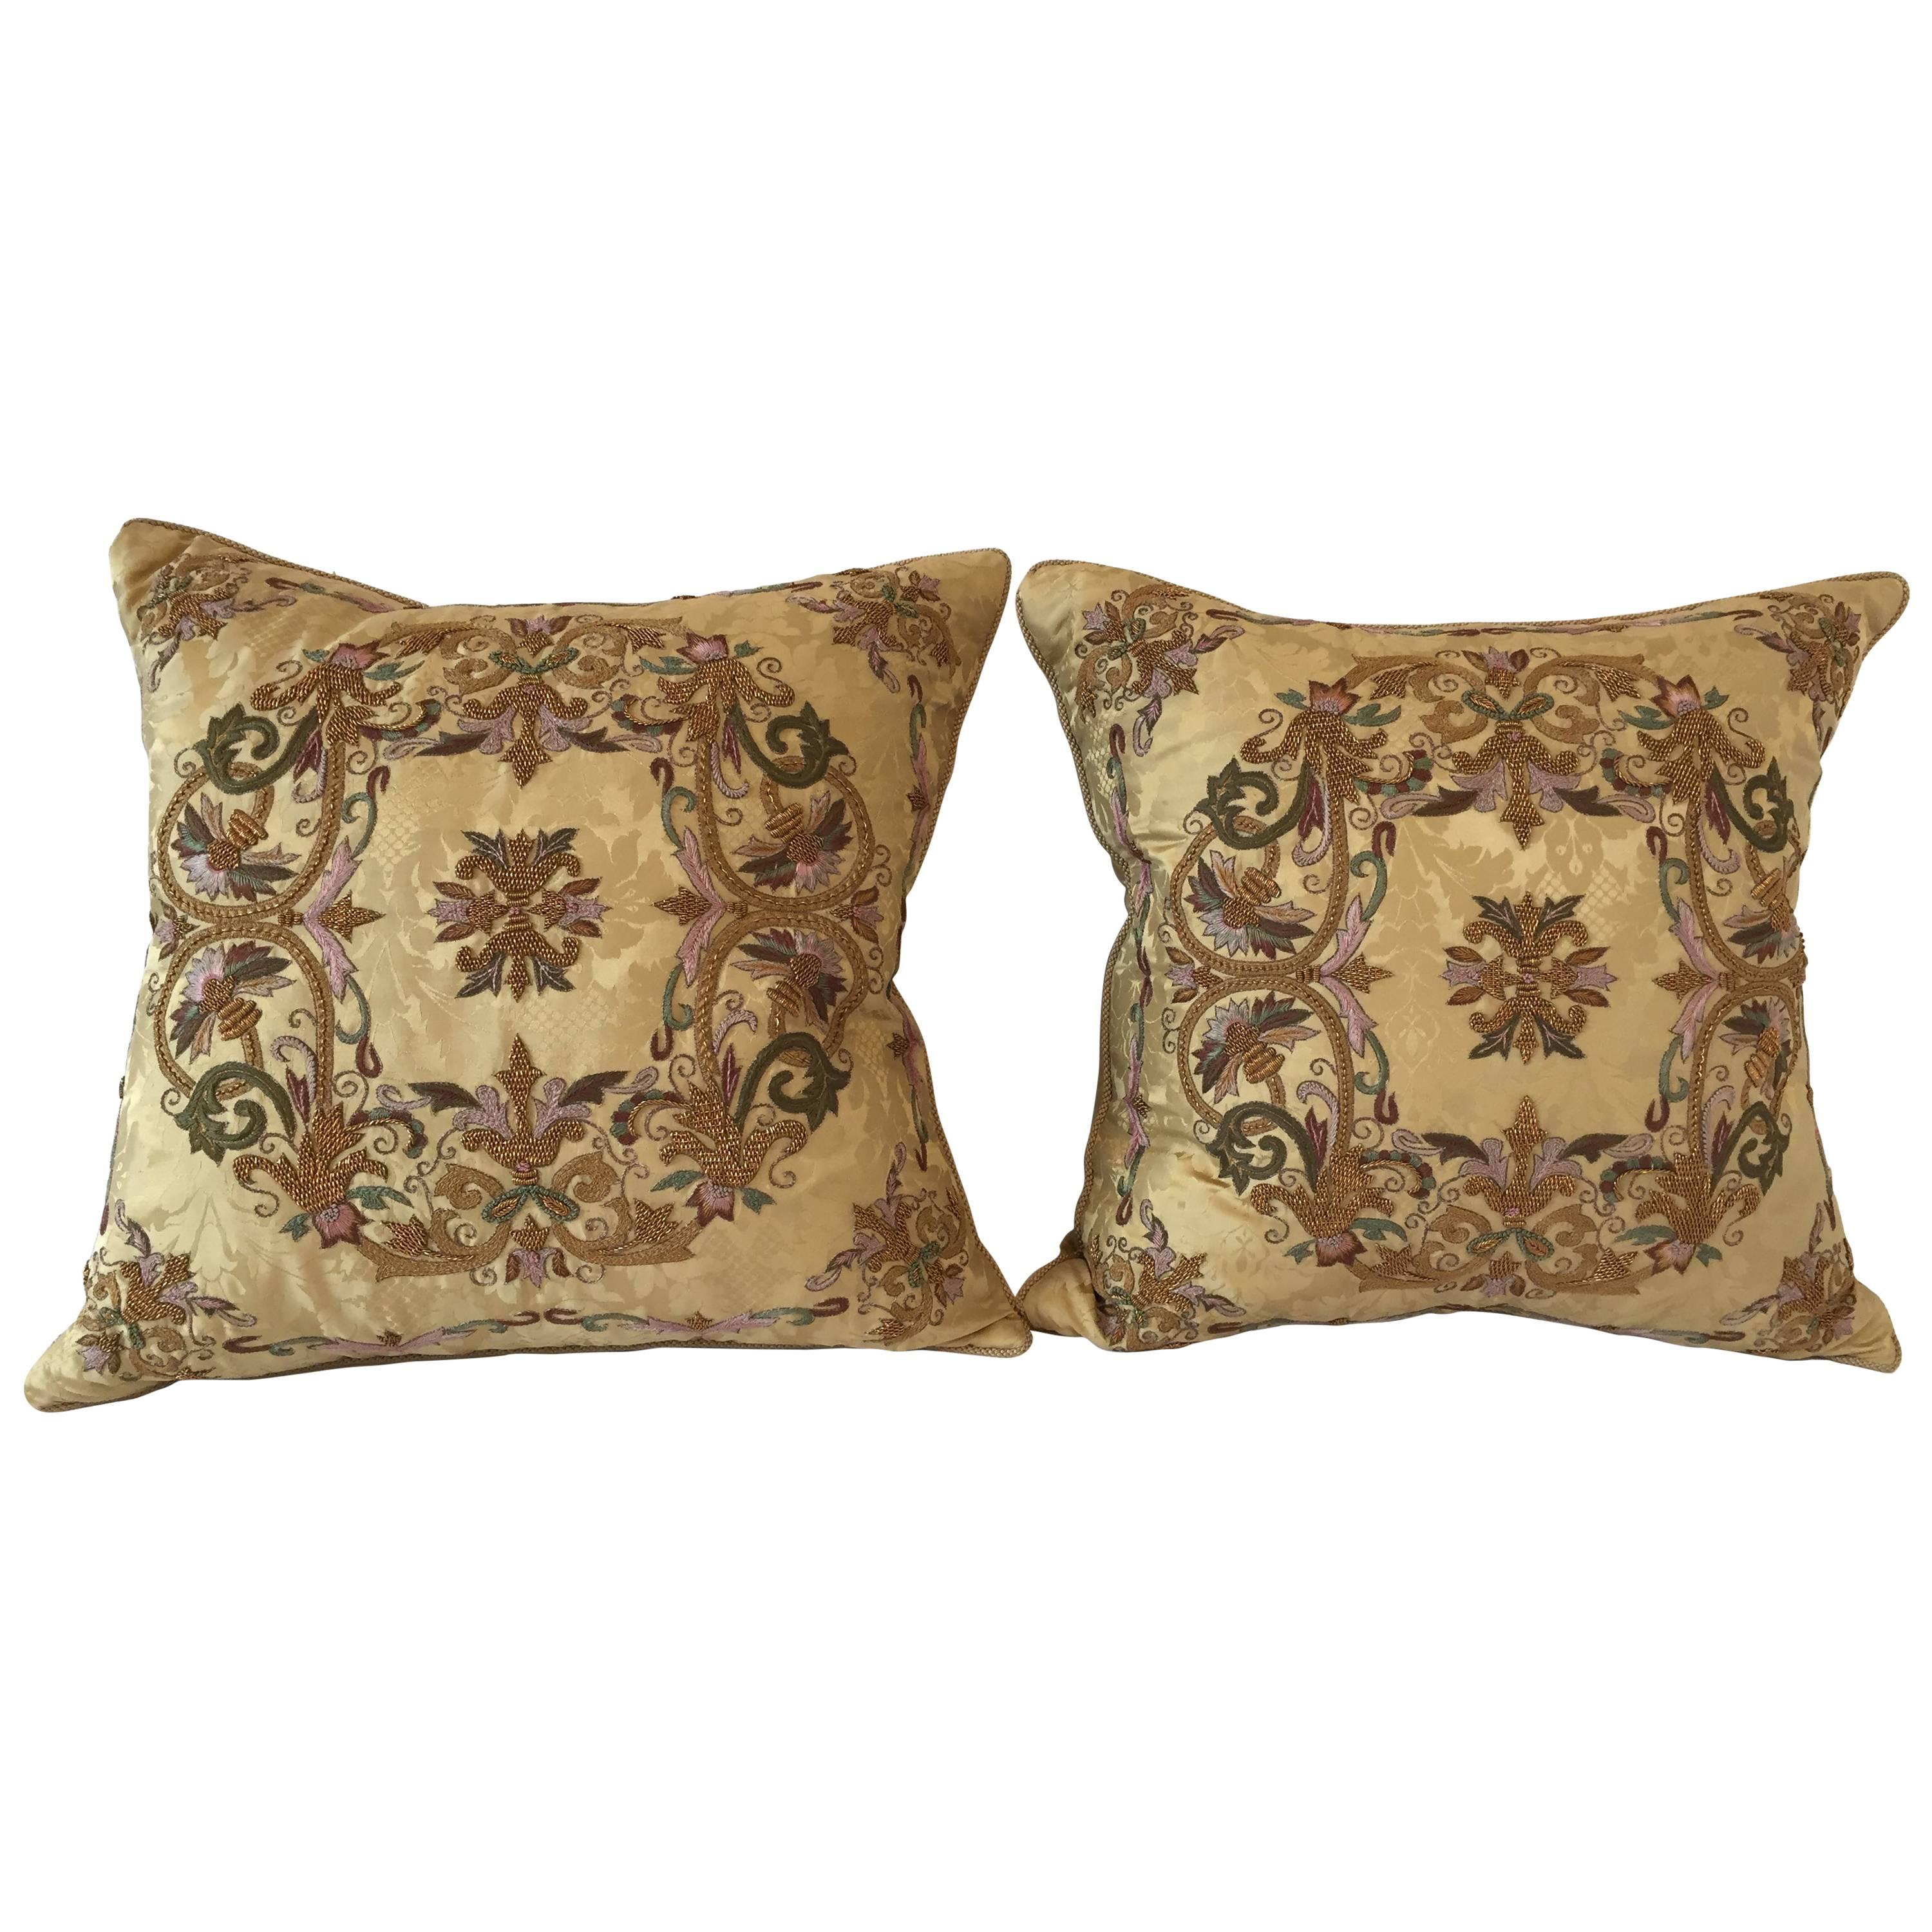 Gorgeous Designer Embroidered Pair of Gold Throw Pillows